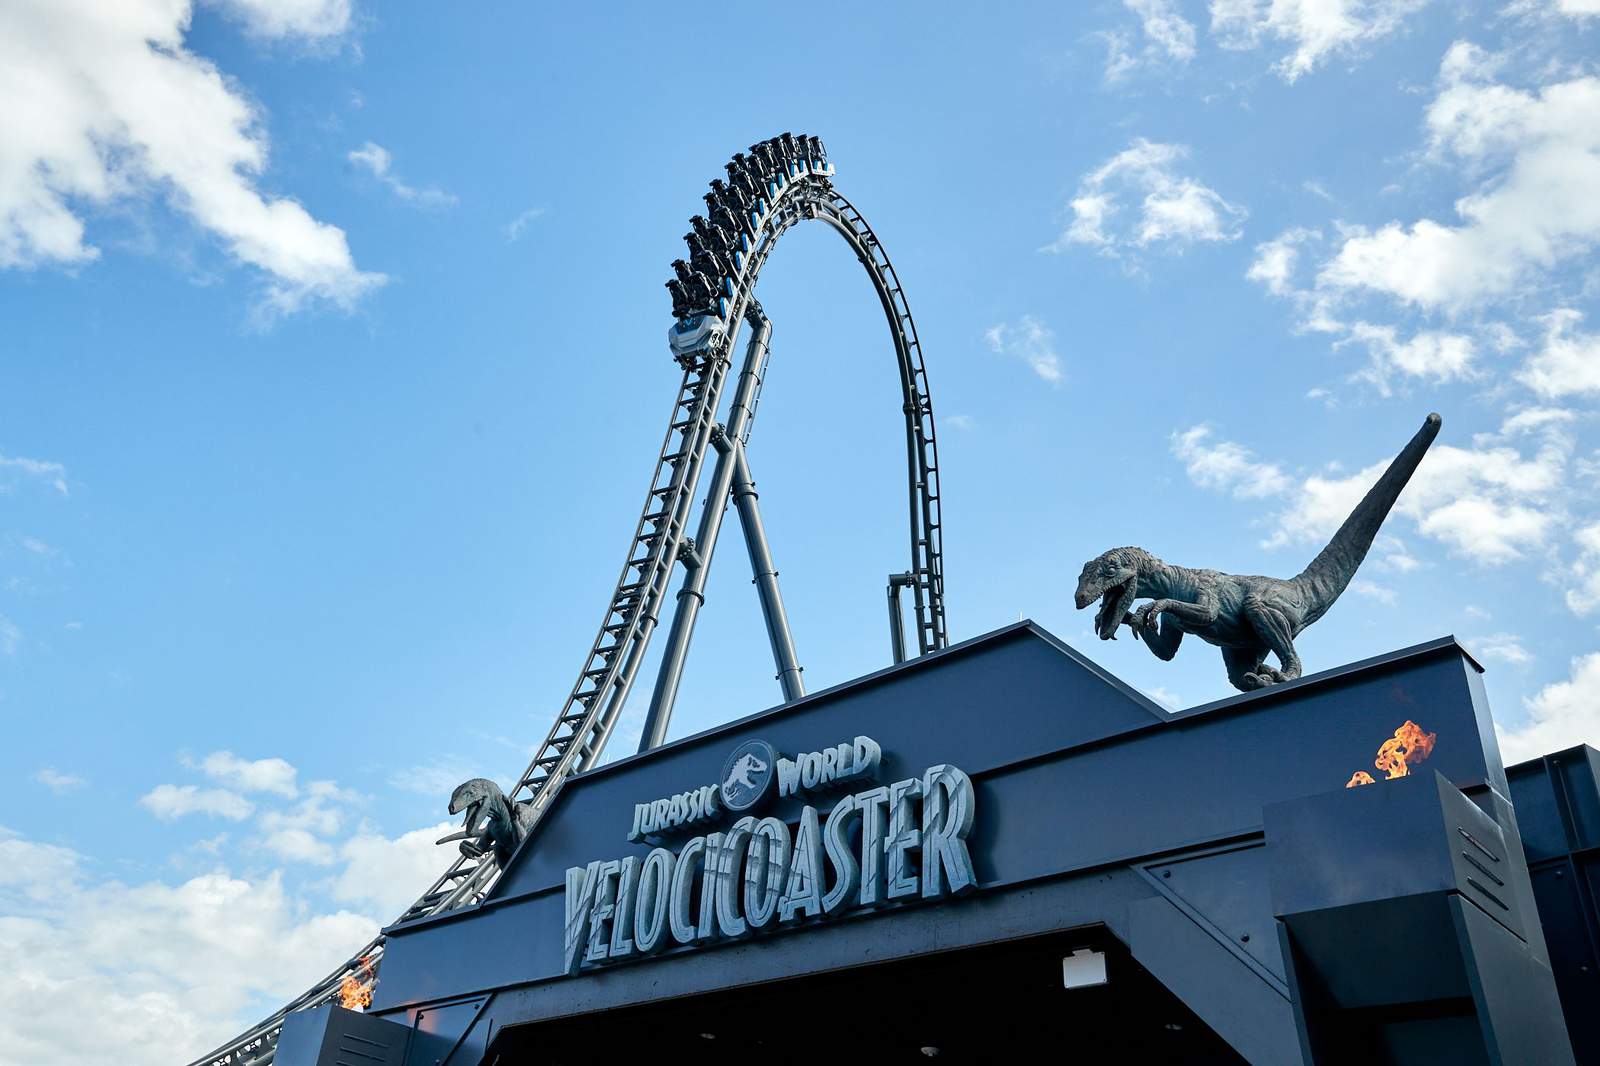 Universal announces opening date for Jurassic World: Velocicoaster